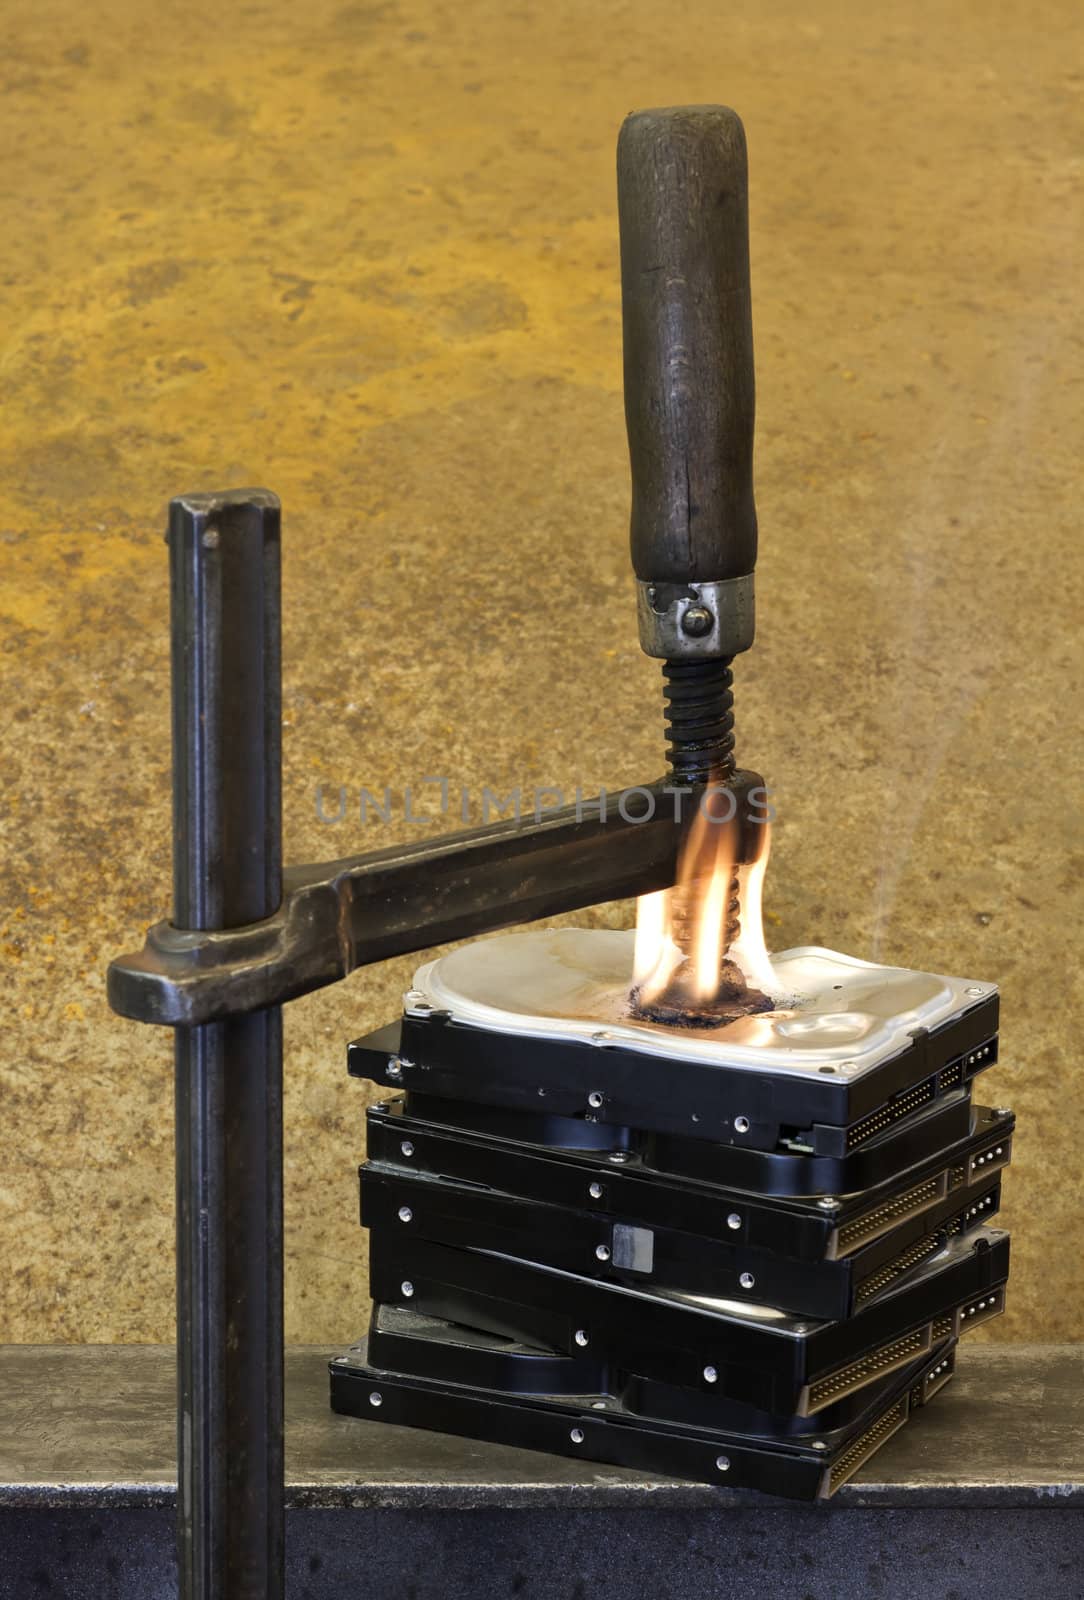 clamp pressing on burning stack of hard drives by gewoldi